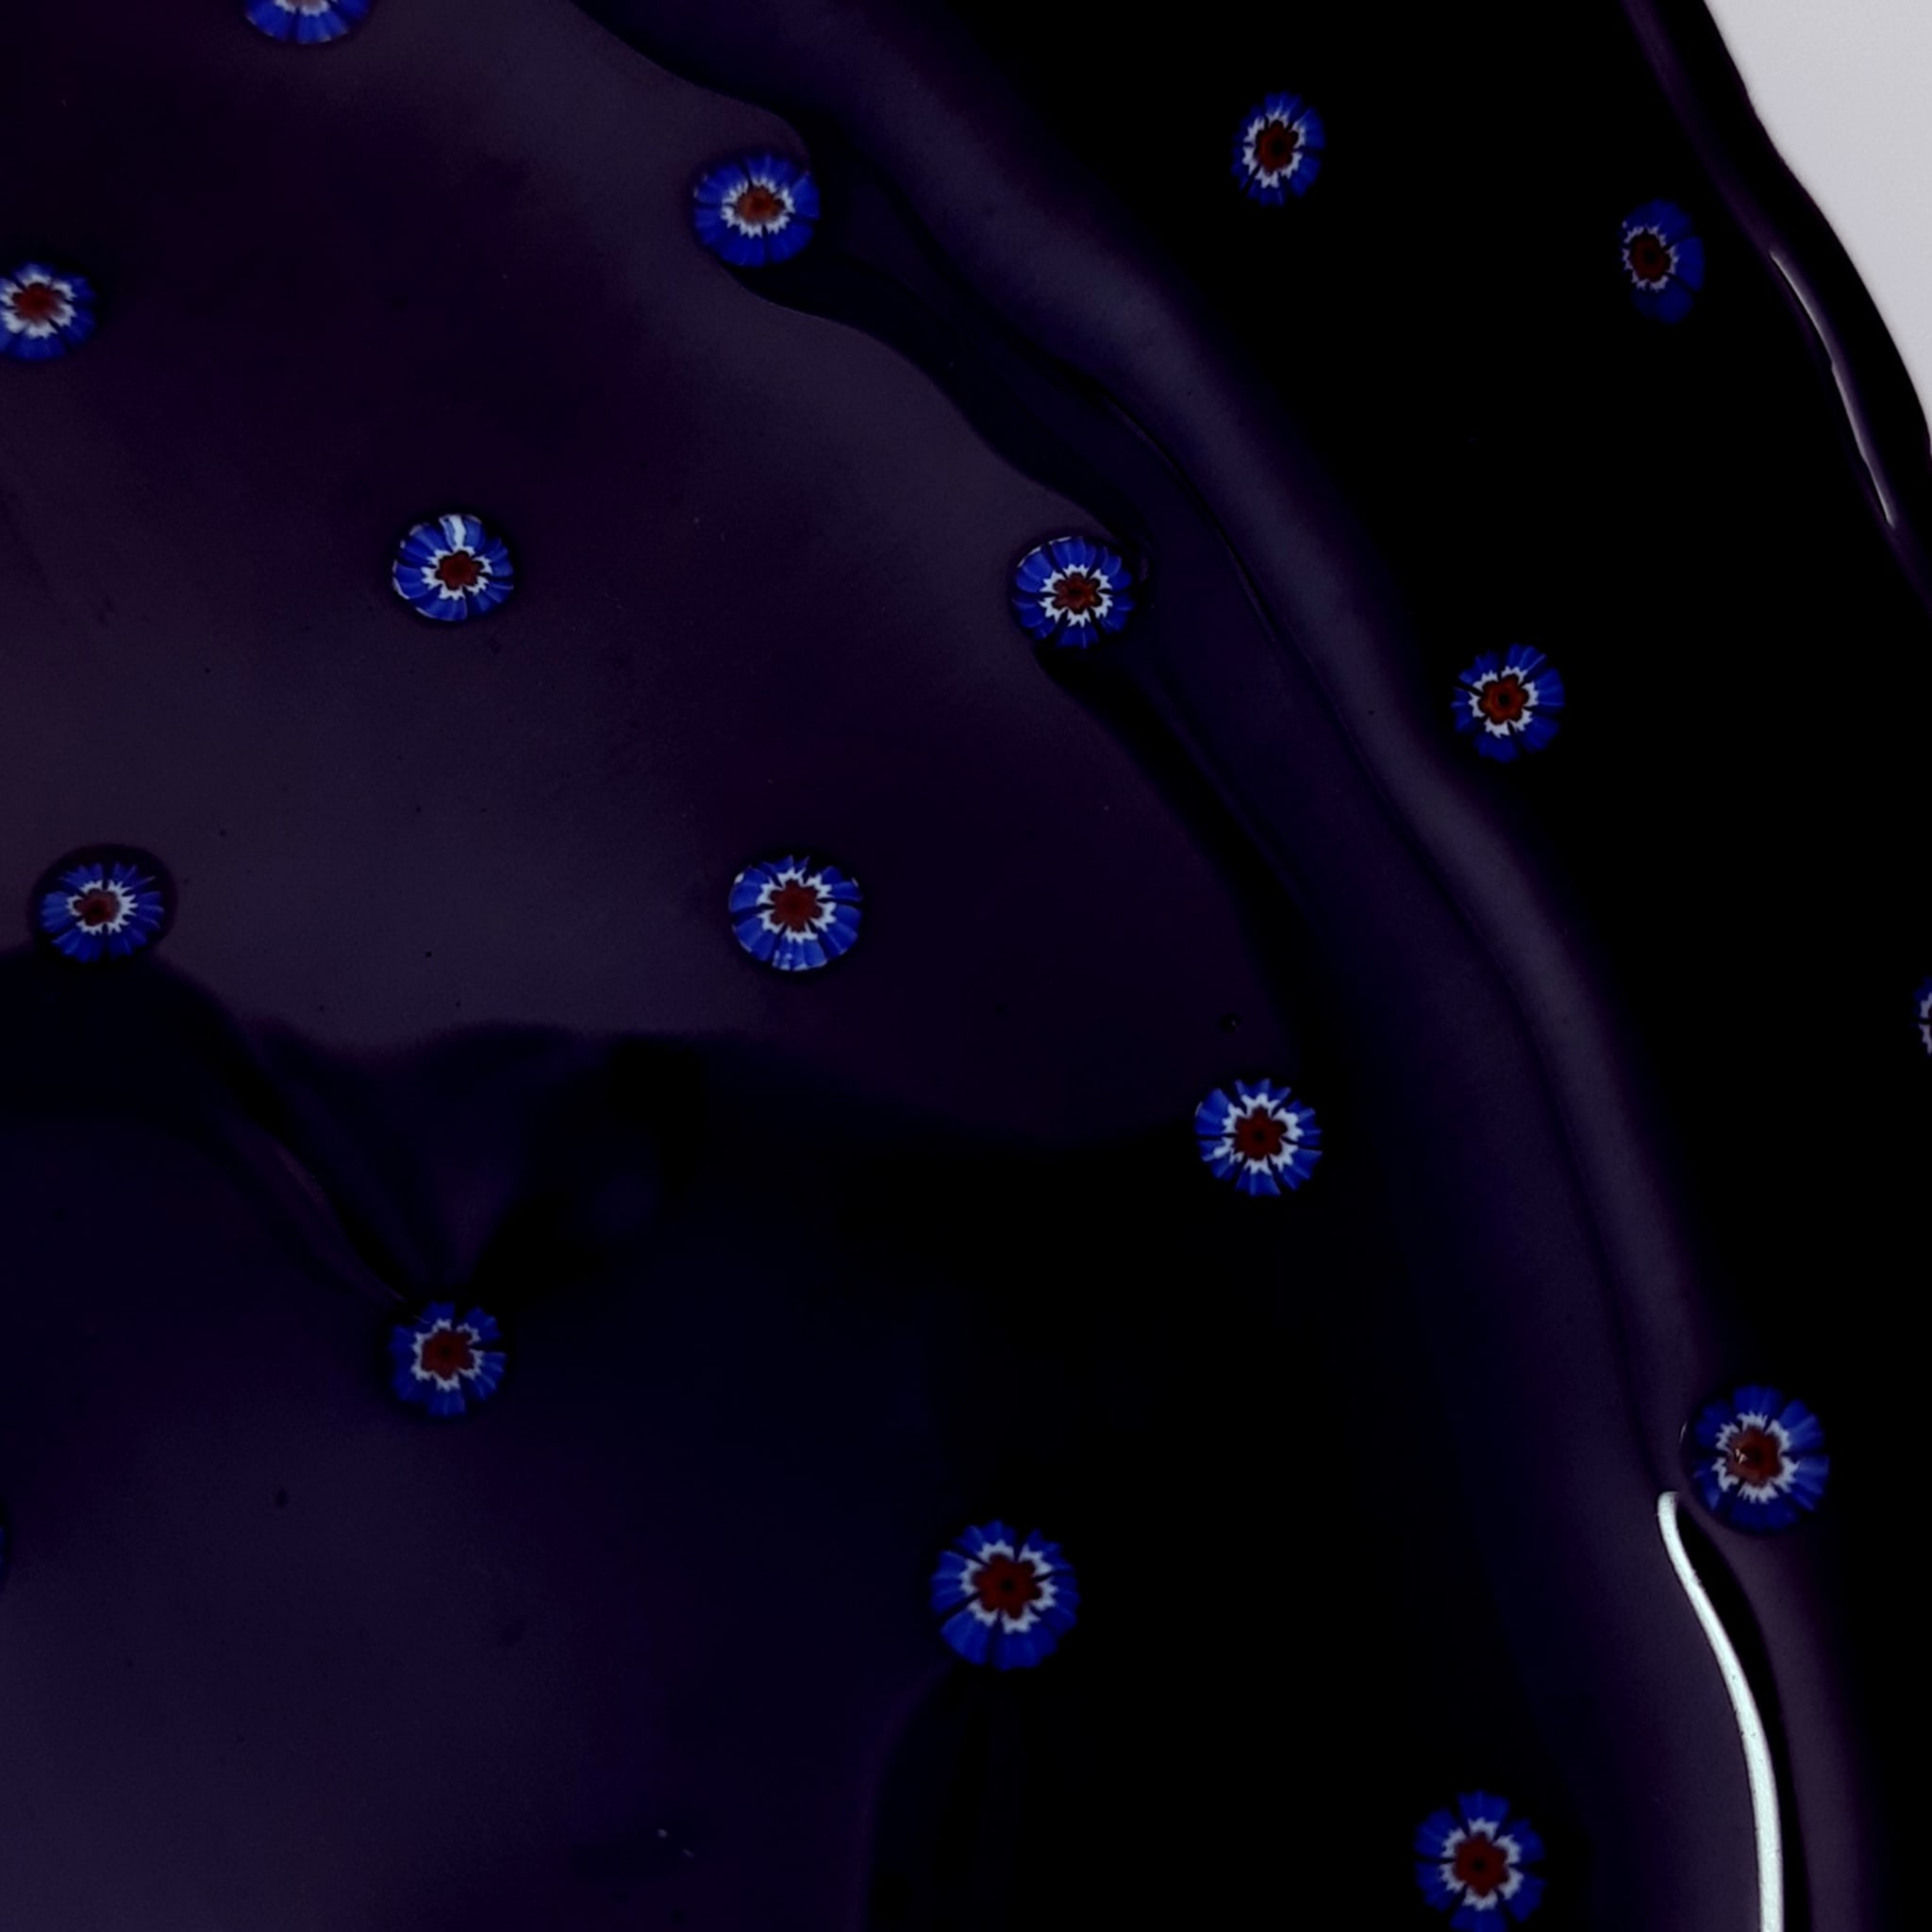 Black Glass Serving Platter with floral murrini inlays - Alternative view 4